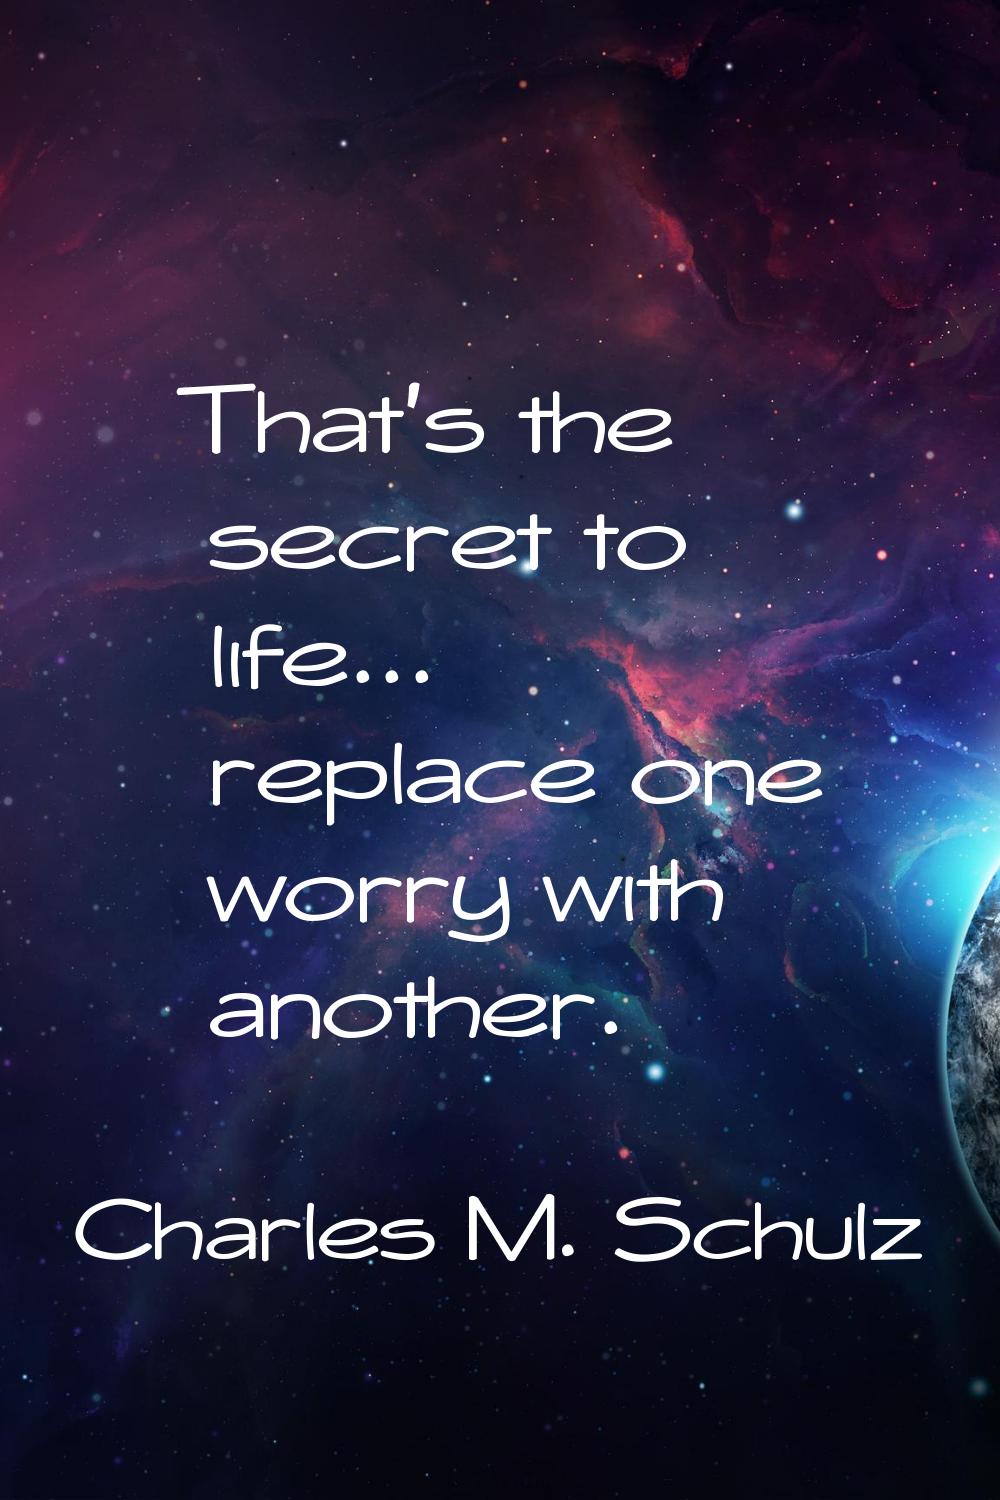 That's the secret to life... replace one worry with another.